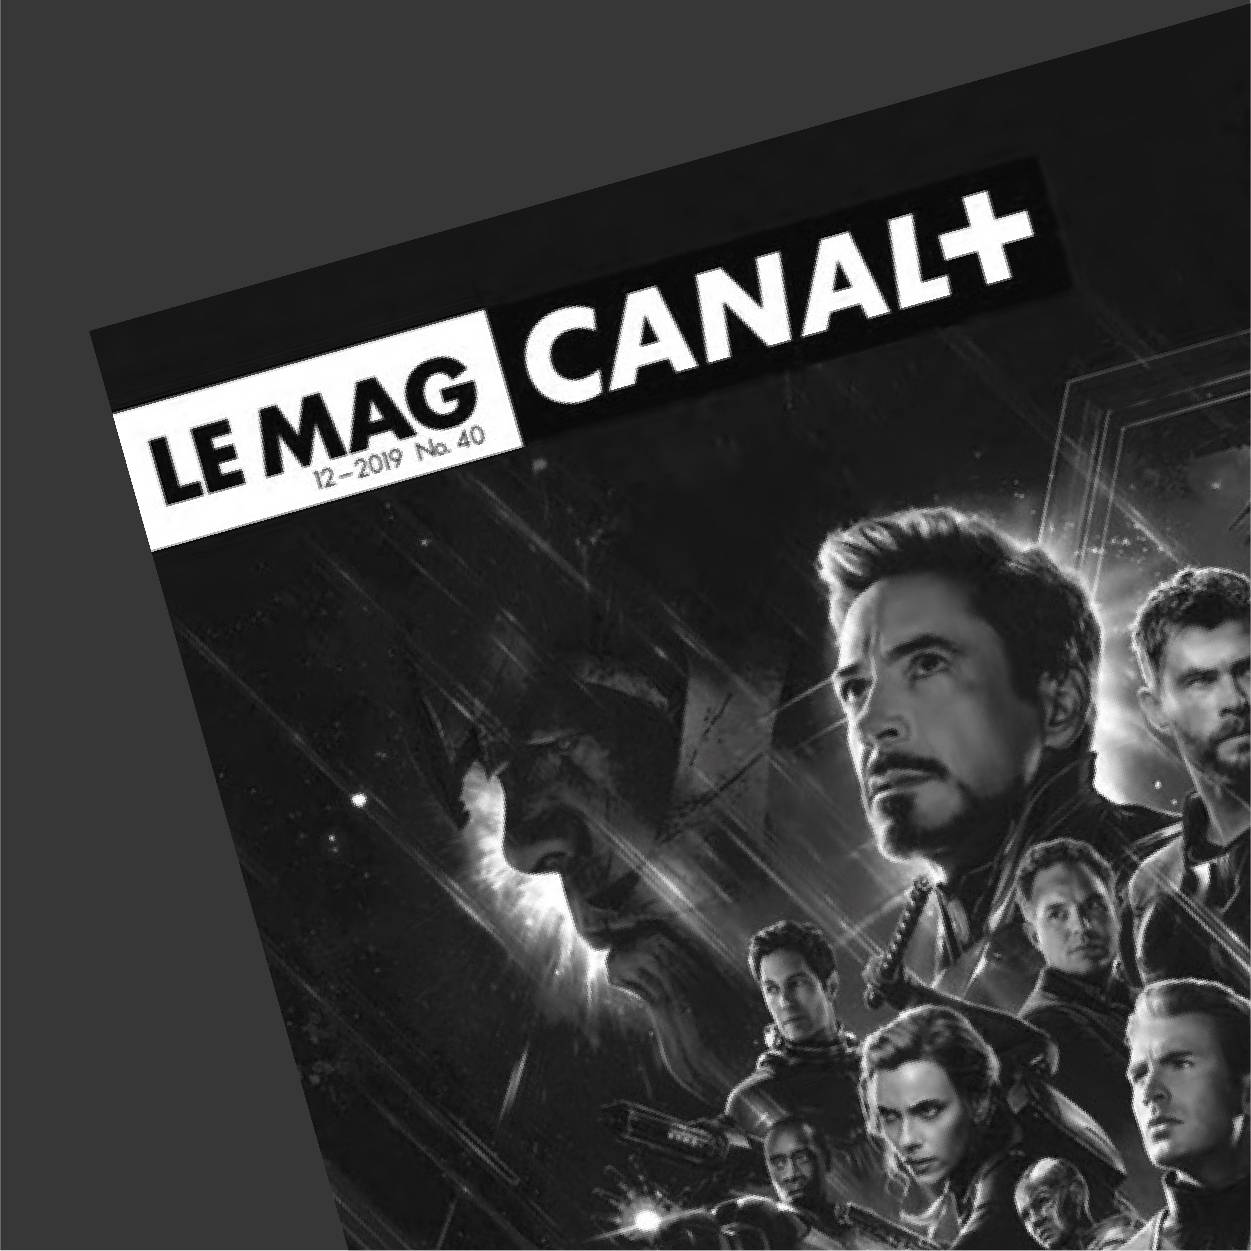 Le Mag Canal+